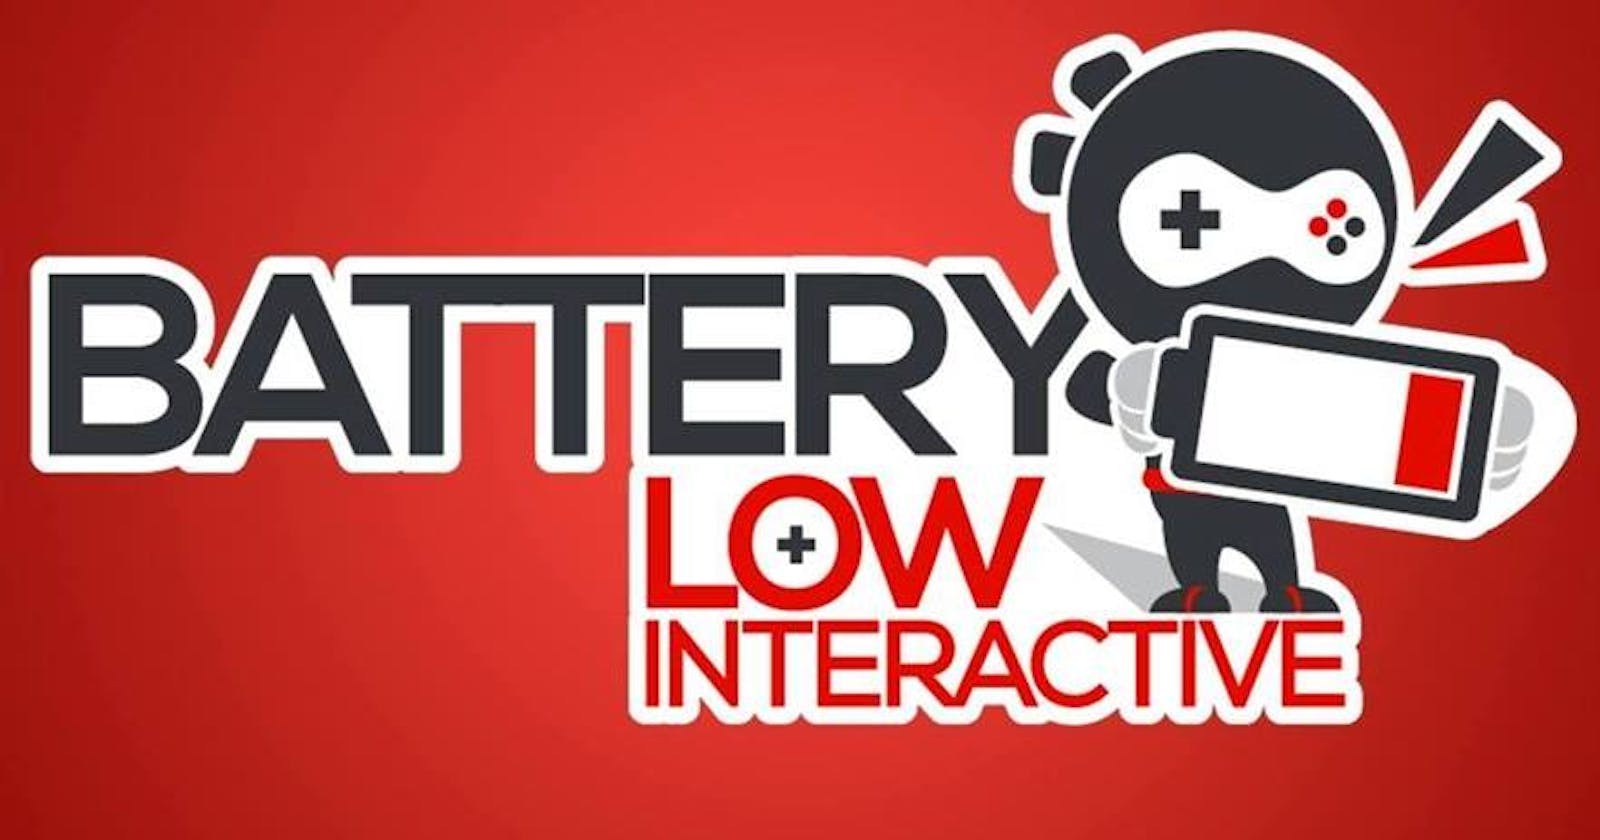 How Battery Low Interactive Limited used Onethread to manage their business